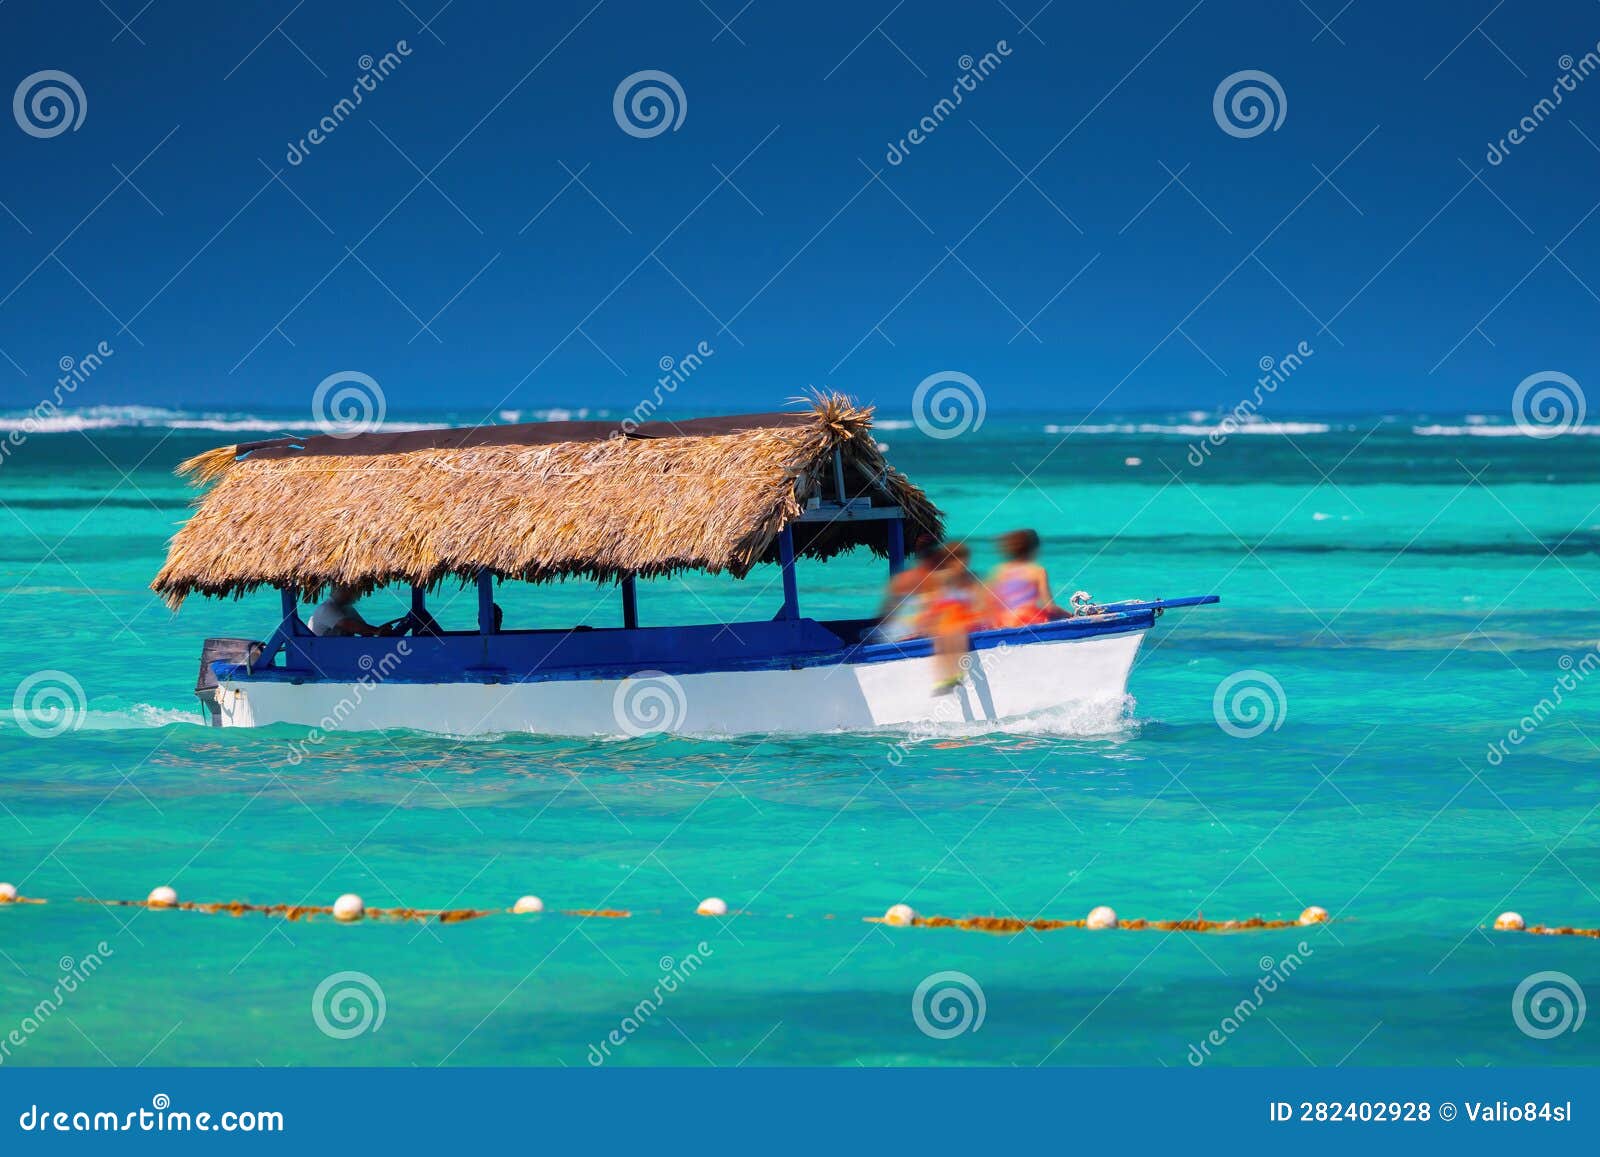 caribbean sea and sailing boat on the water, hot summer day on the caribe. punta cana, dominican republic